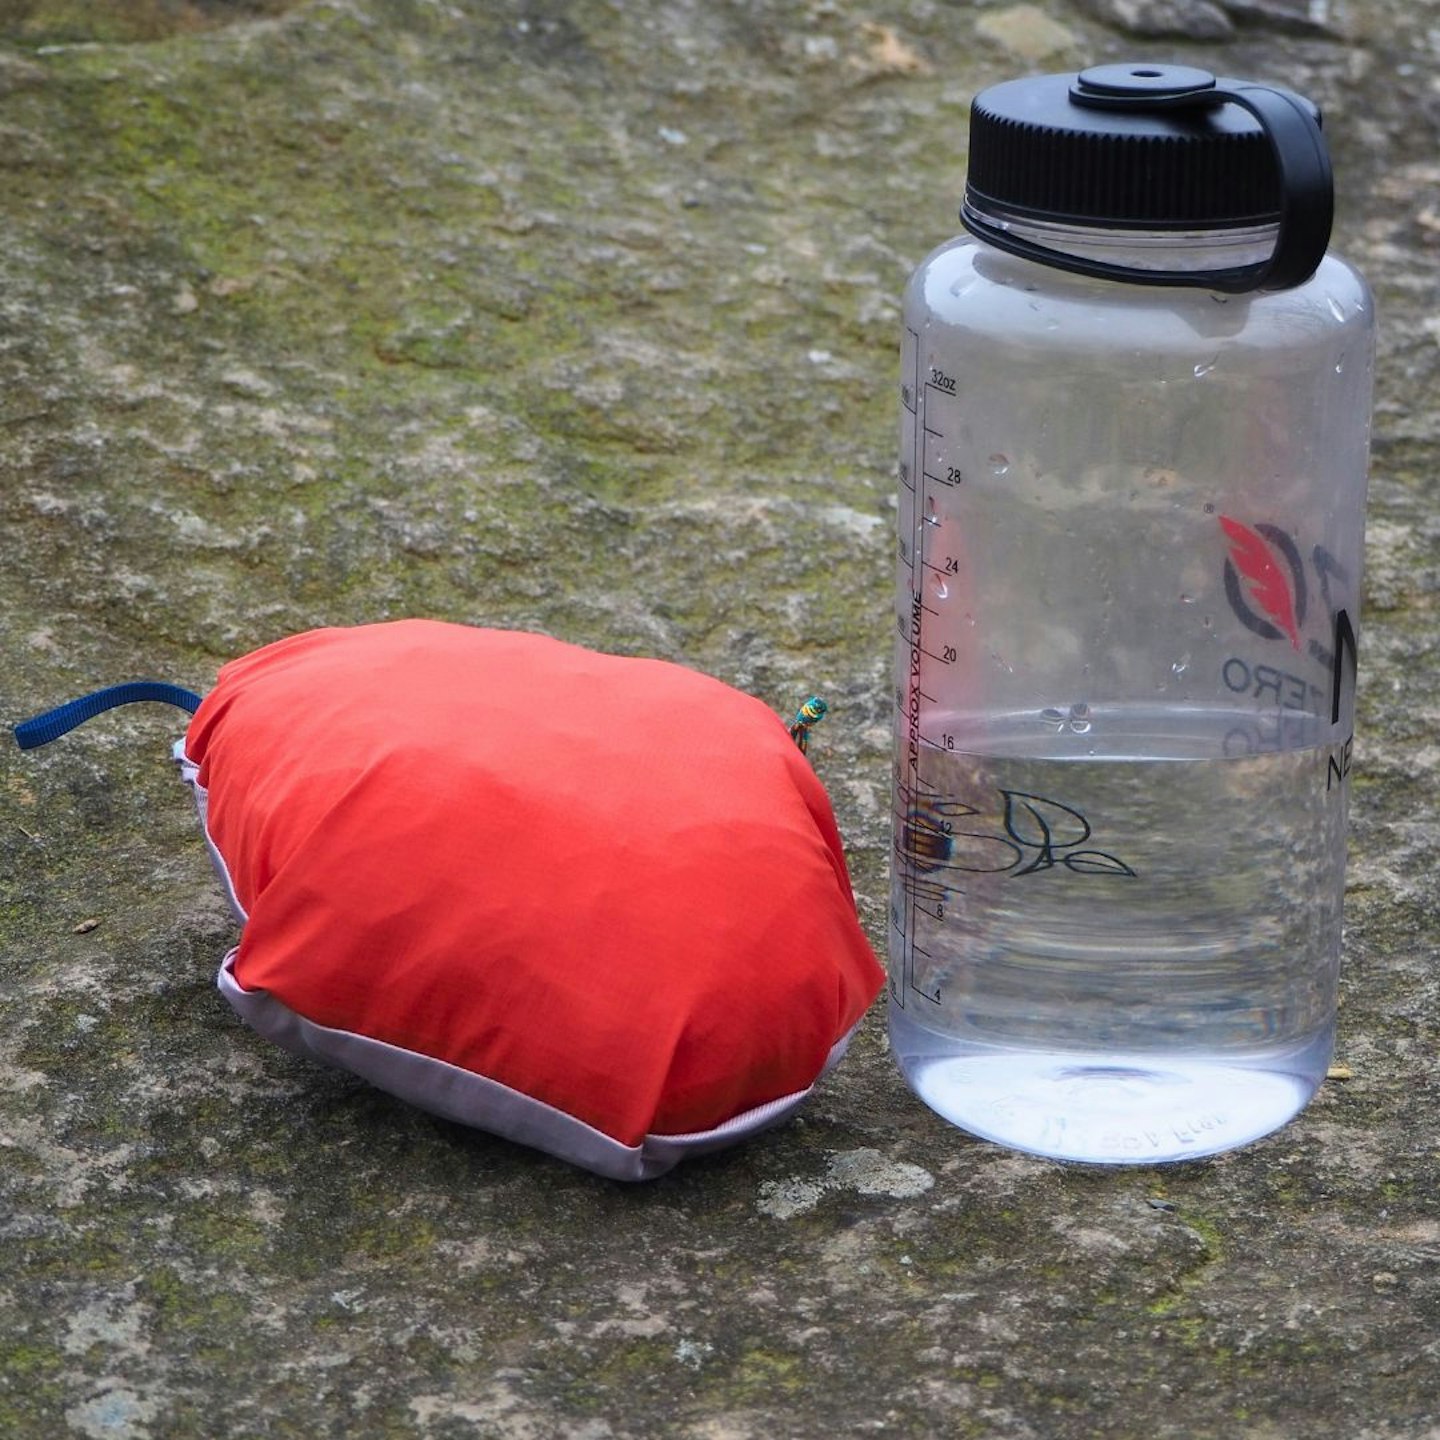 Patagonia Storm Racer Waterproof Jacket in stash pocket next to drink bottle for scale